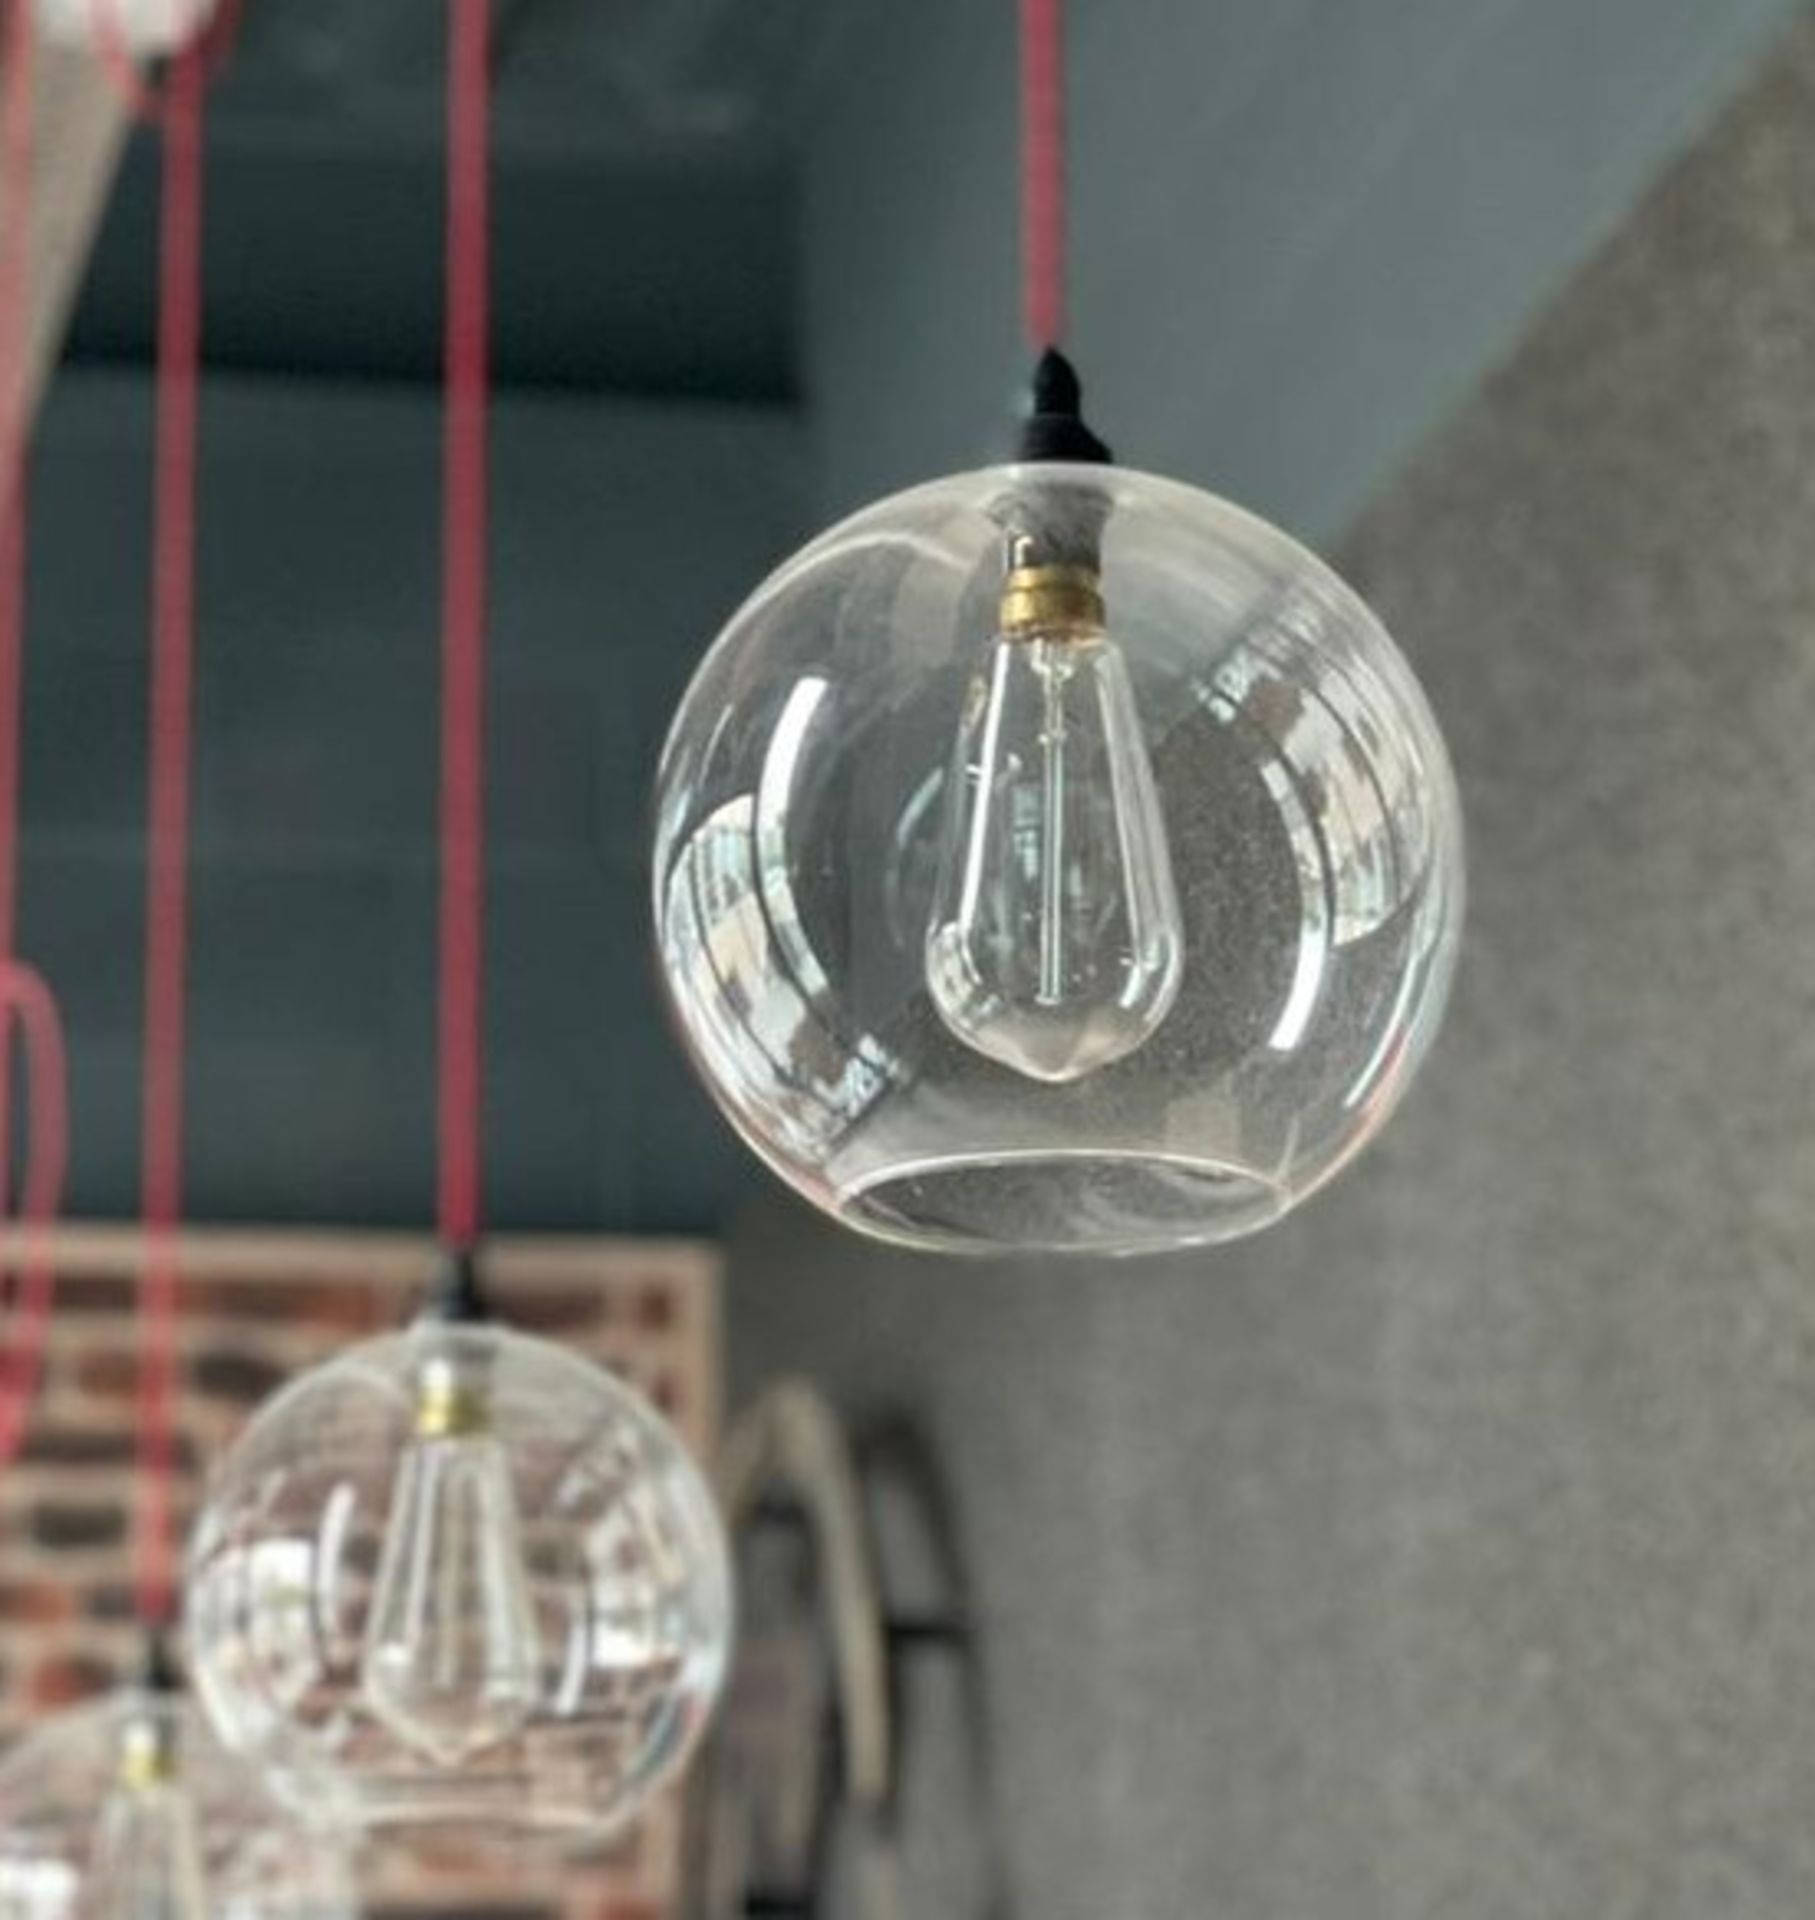 7 x Suspended Ceiling Pendant Lights With Clear Glass Shades - CL674 - Location: Telford,